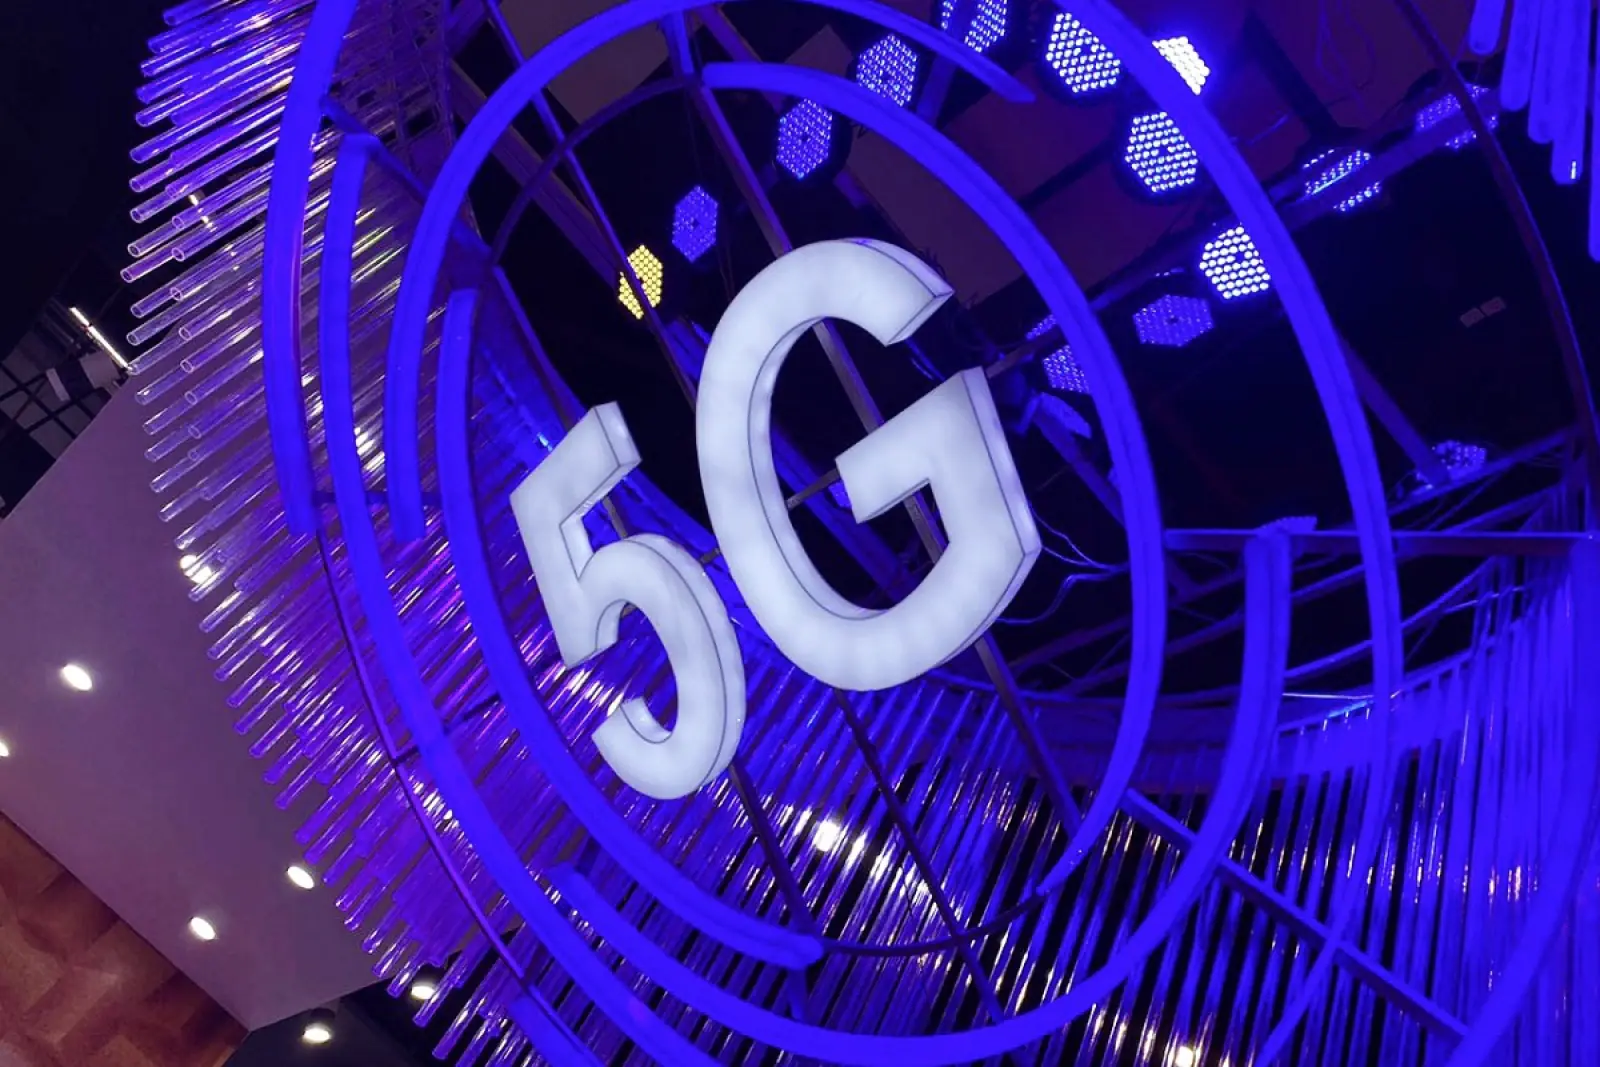 5G subscribers expected to be 80 crores by 2030, target is 24 crore broadband connections